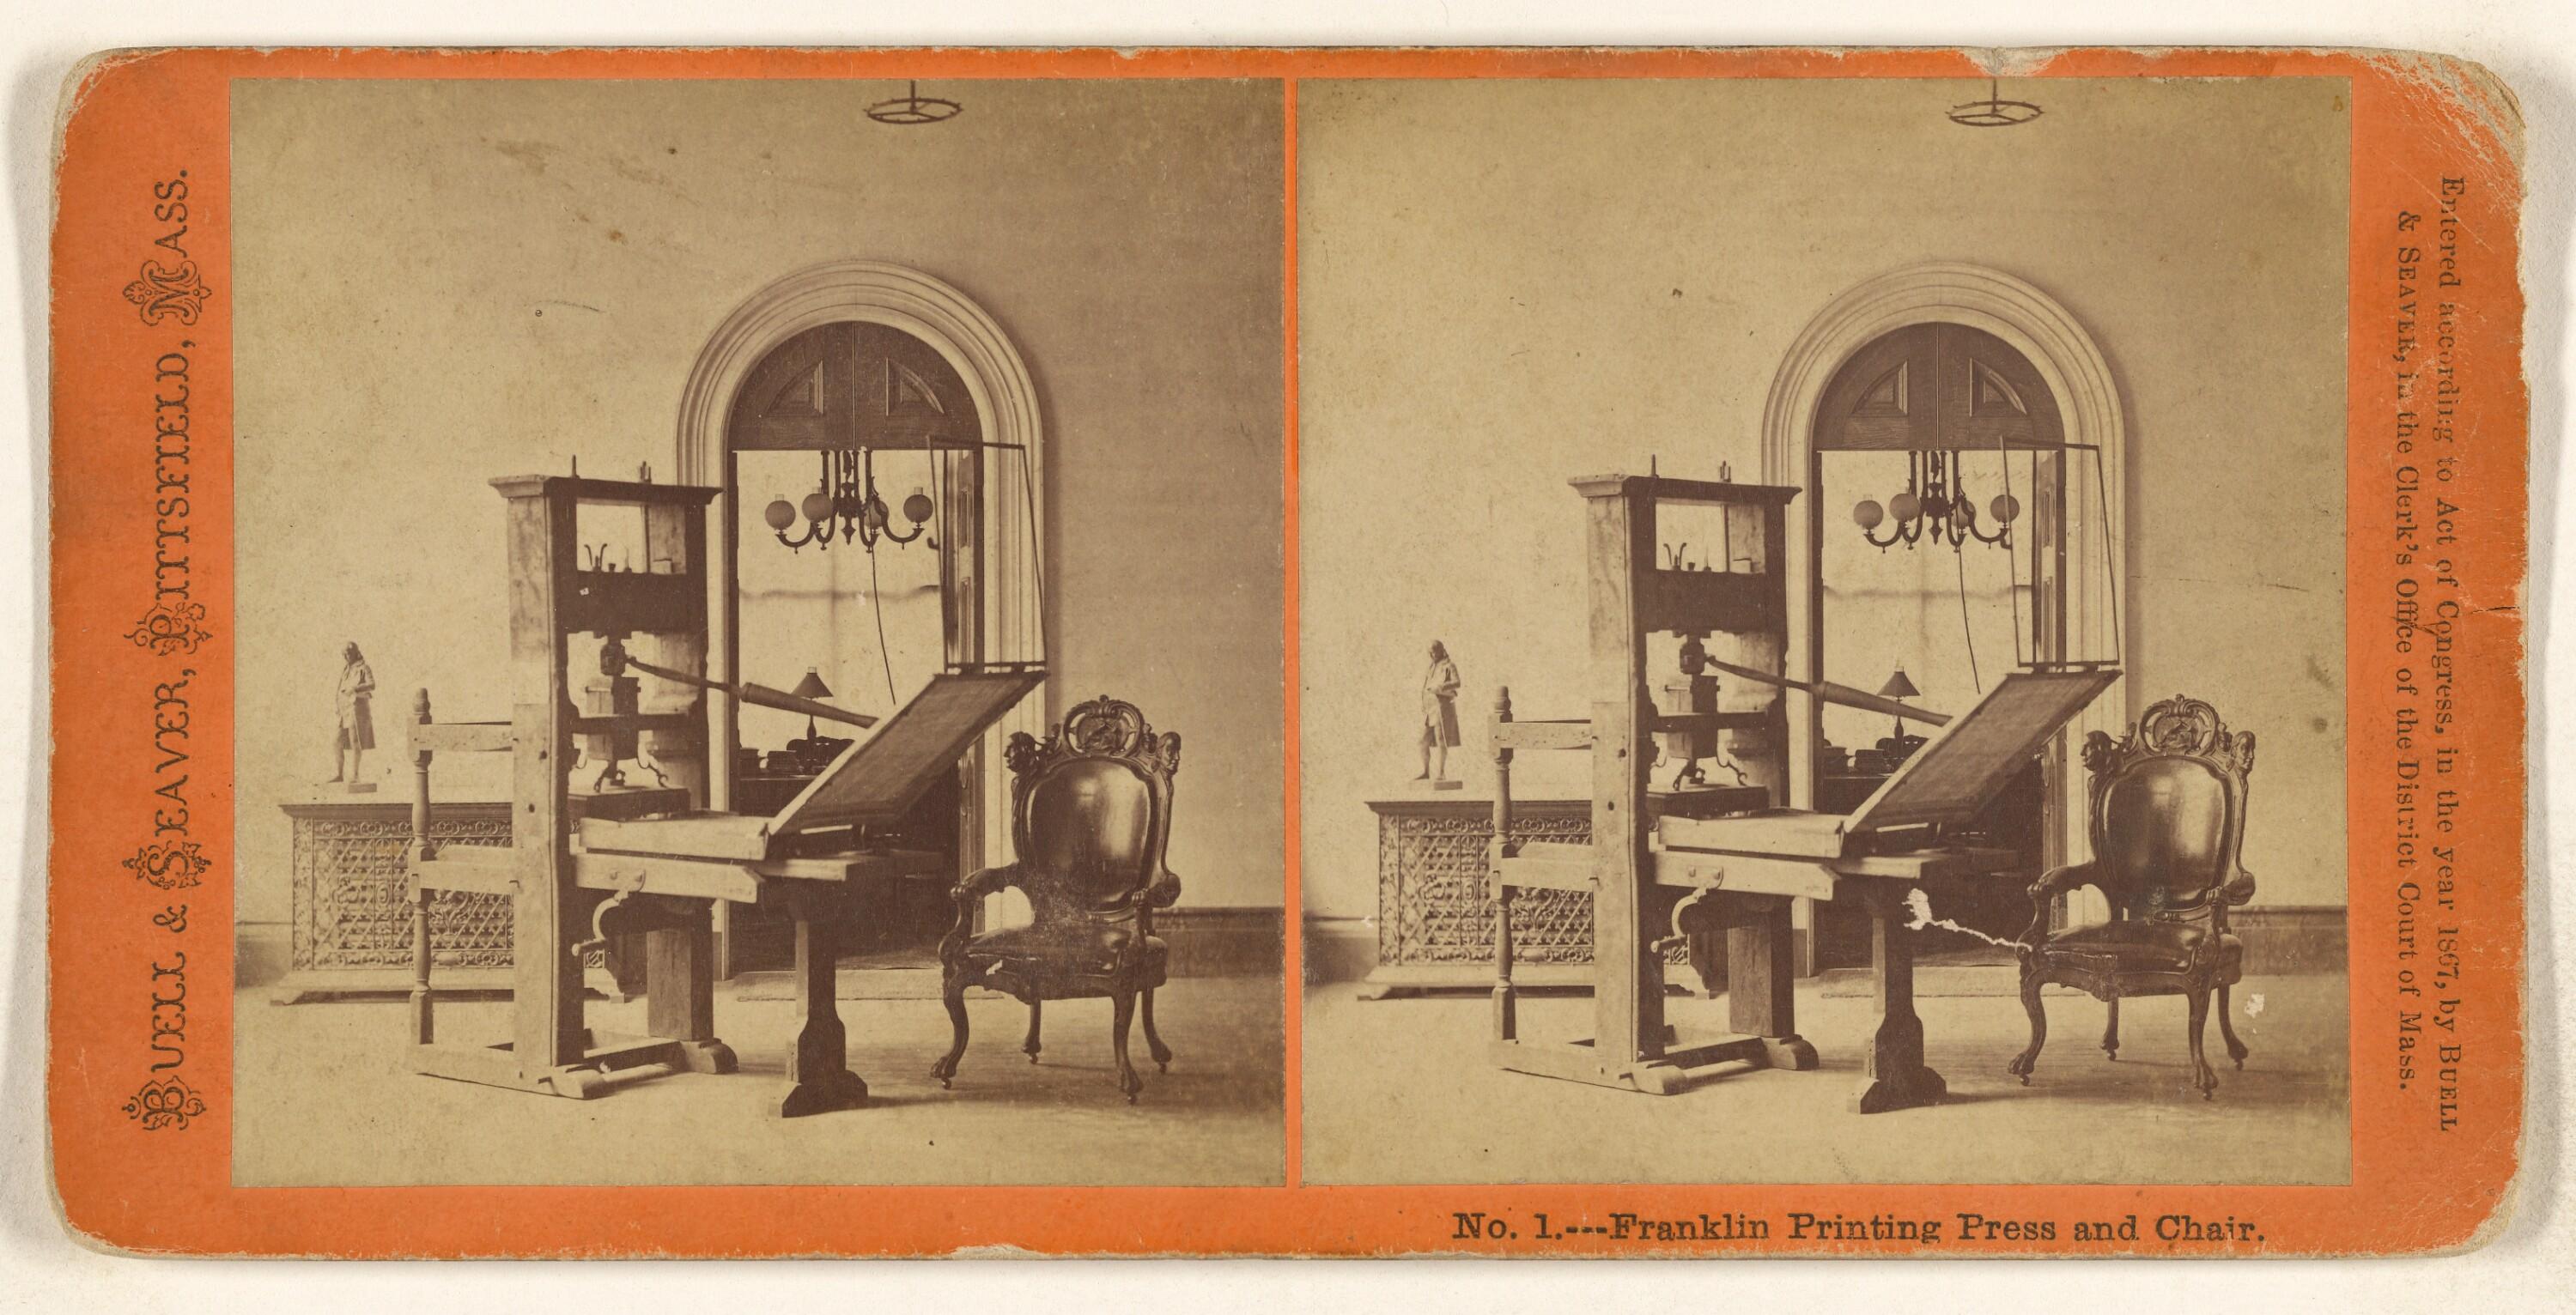 Franklin Printing Press and Chair